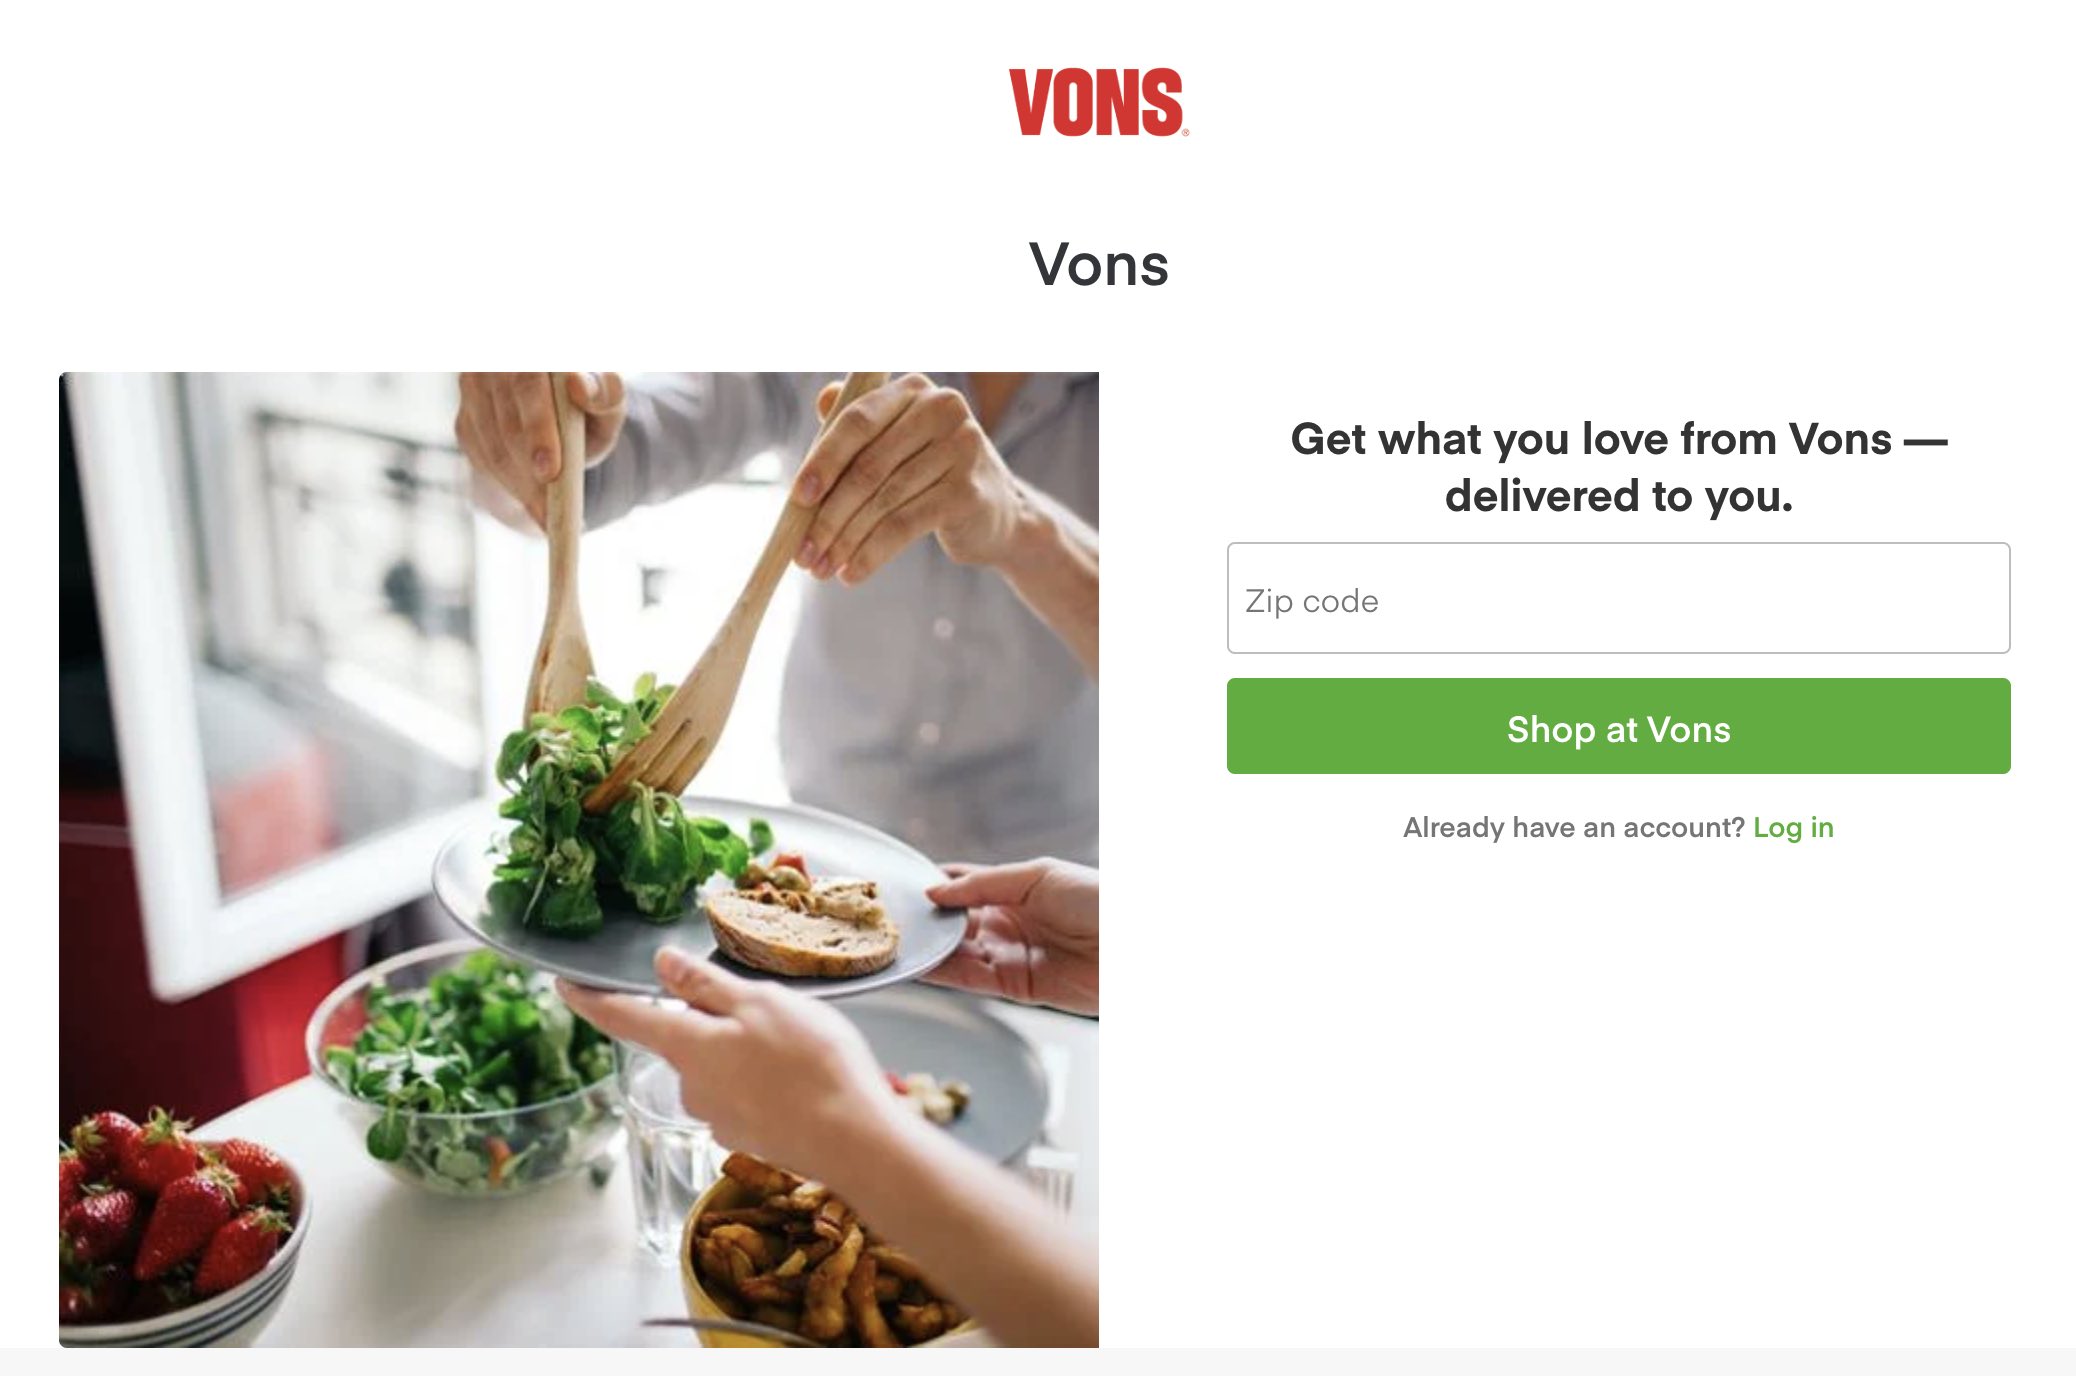 How Does Vons Delivery Work? - AisleofShame.com